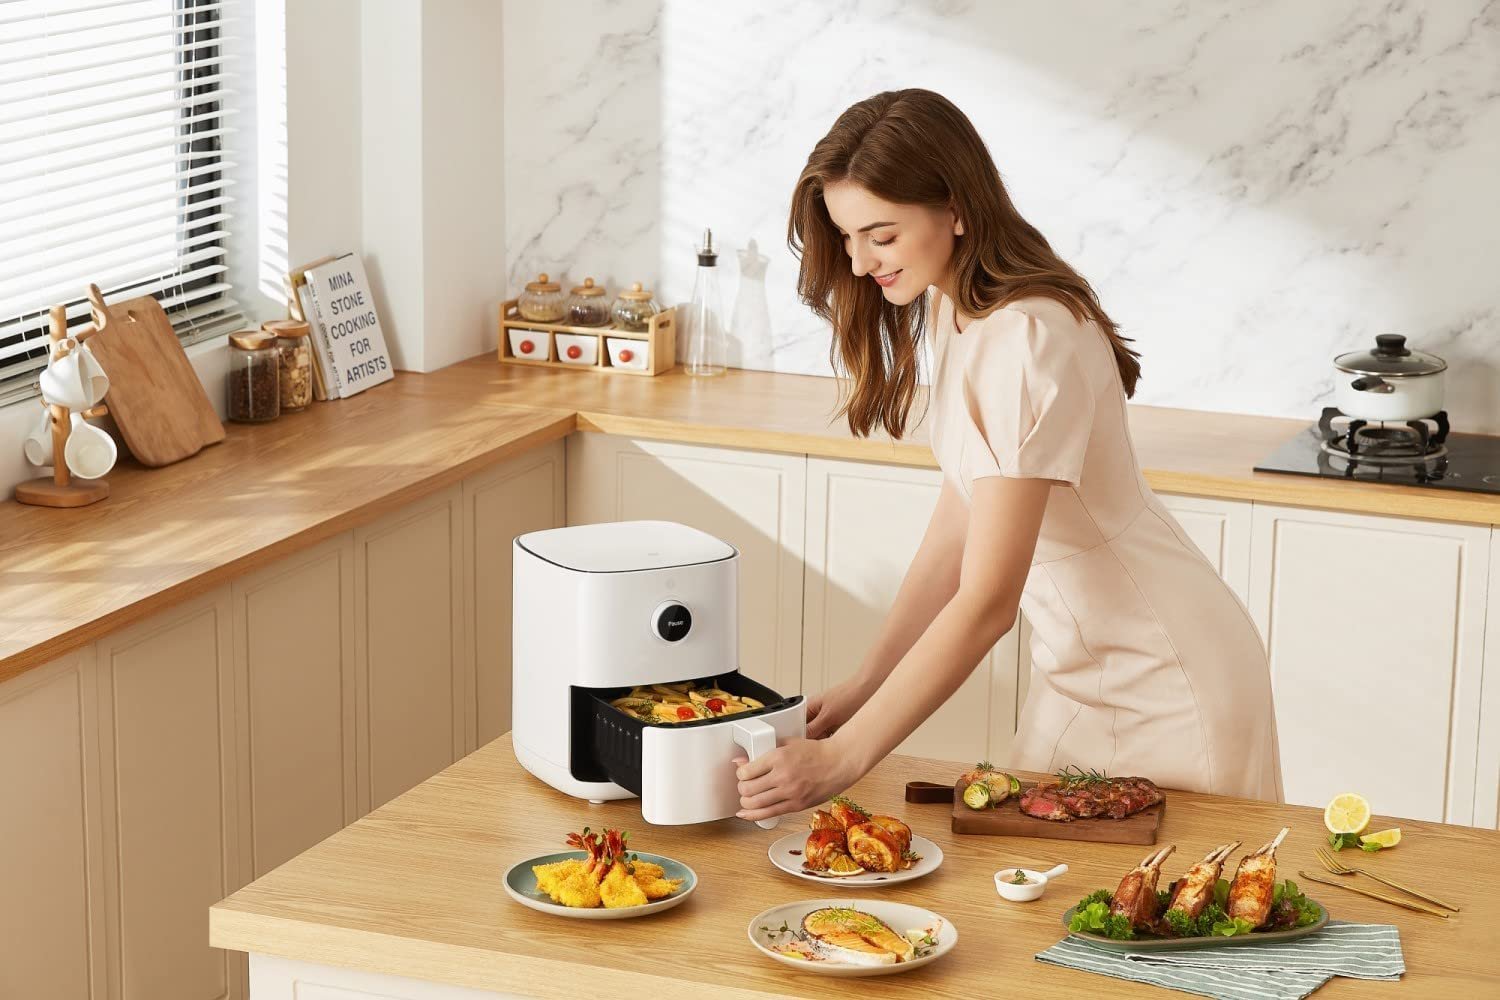 Try the All-in-One Xiaomi Smart Air Fryer - 100+ Recipes & 24hr  Pre-schedule!